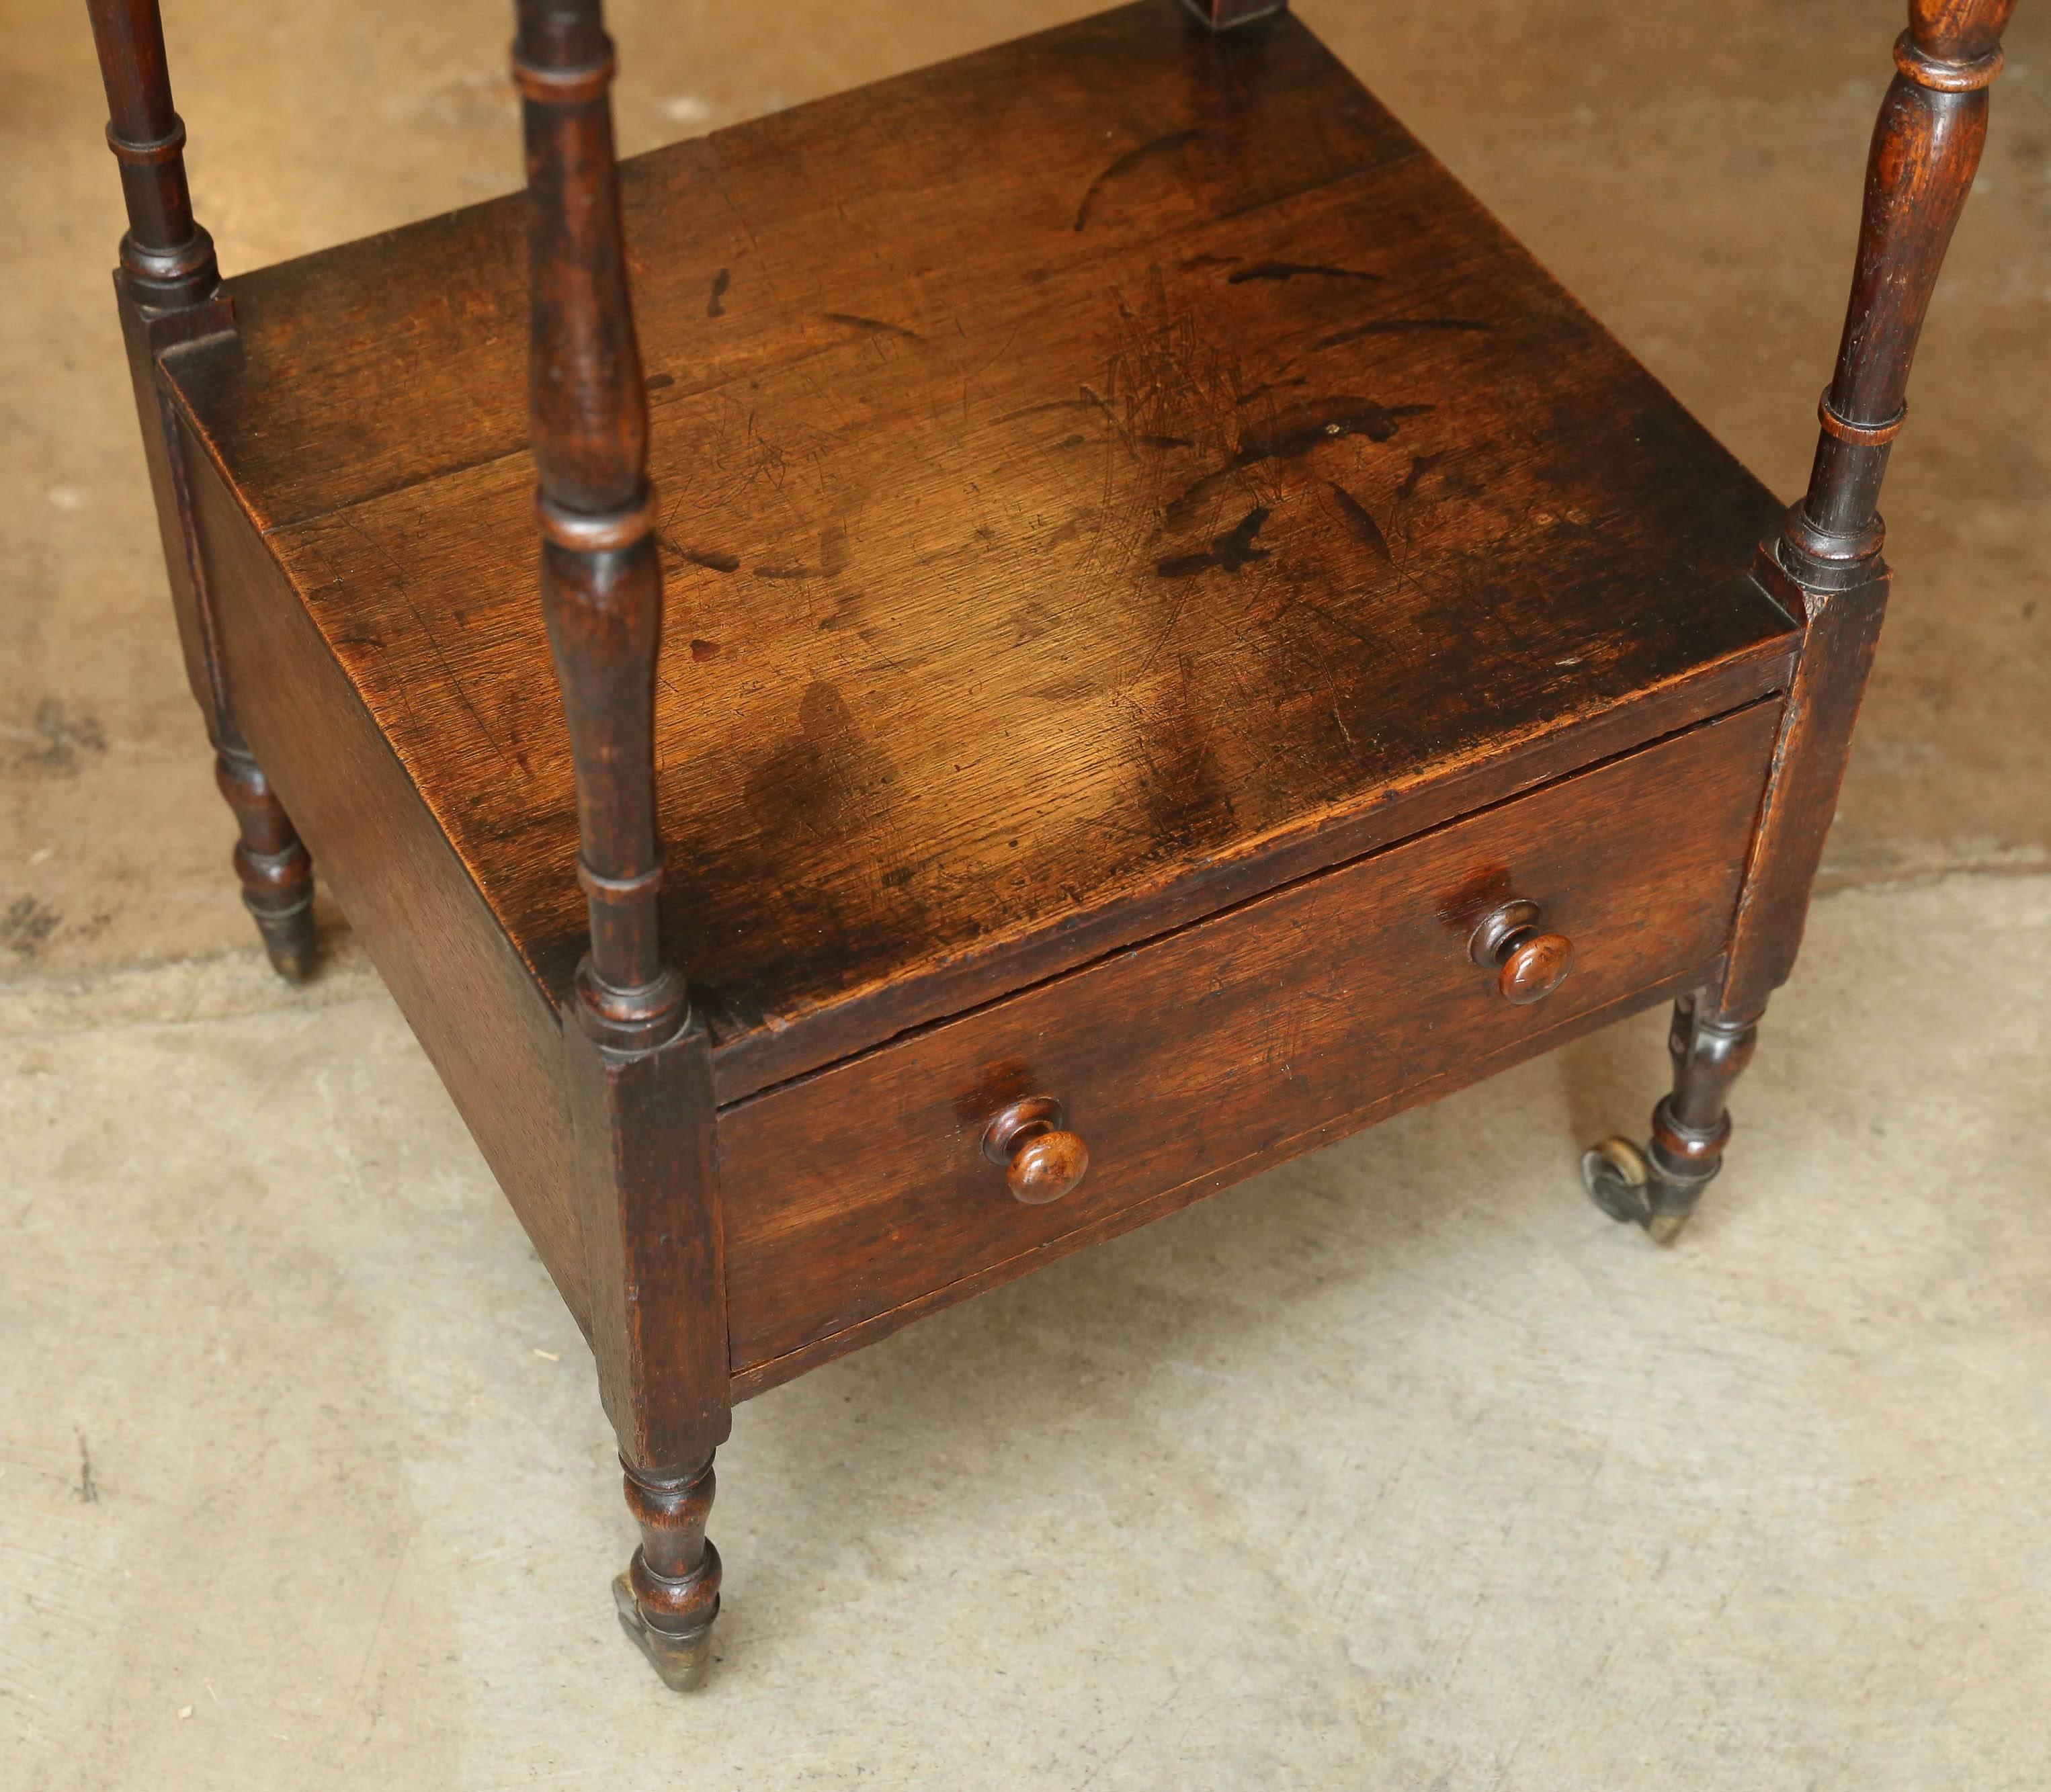 19th century whatnot with three shelves and bottom drawer. Oak and mahogany, circa 1820. Wheels are original.